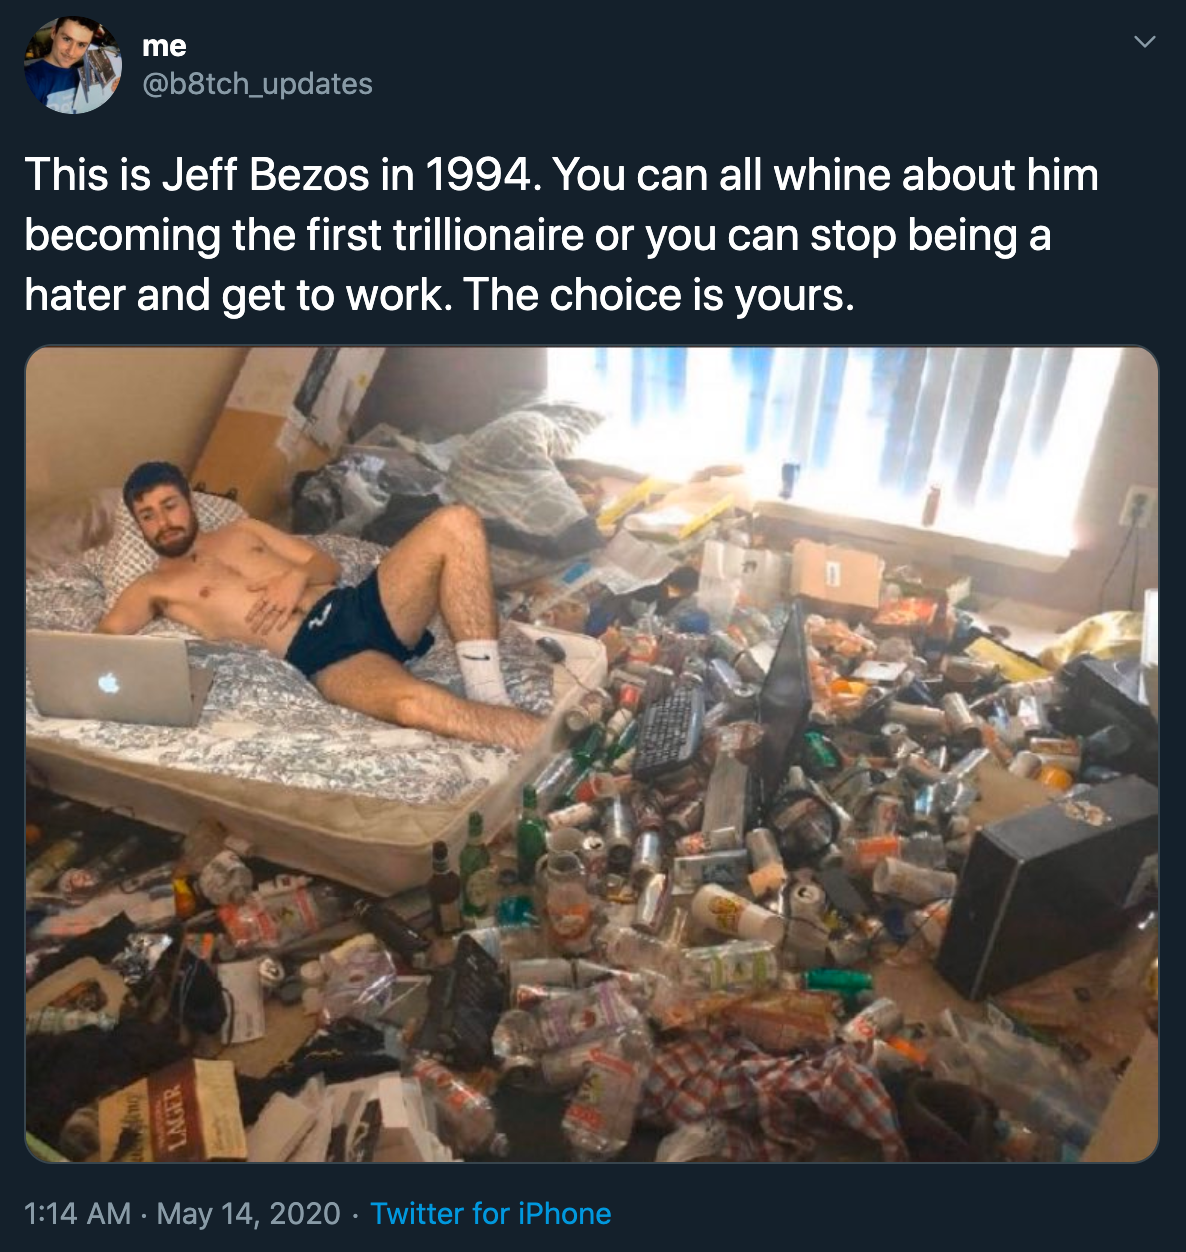 This is Jeff Bezos in 1994. You can all whine about him becoming the first trillionaire or you can stop being a hater and get to work. The choice is yours.